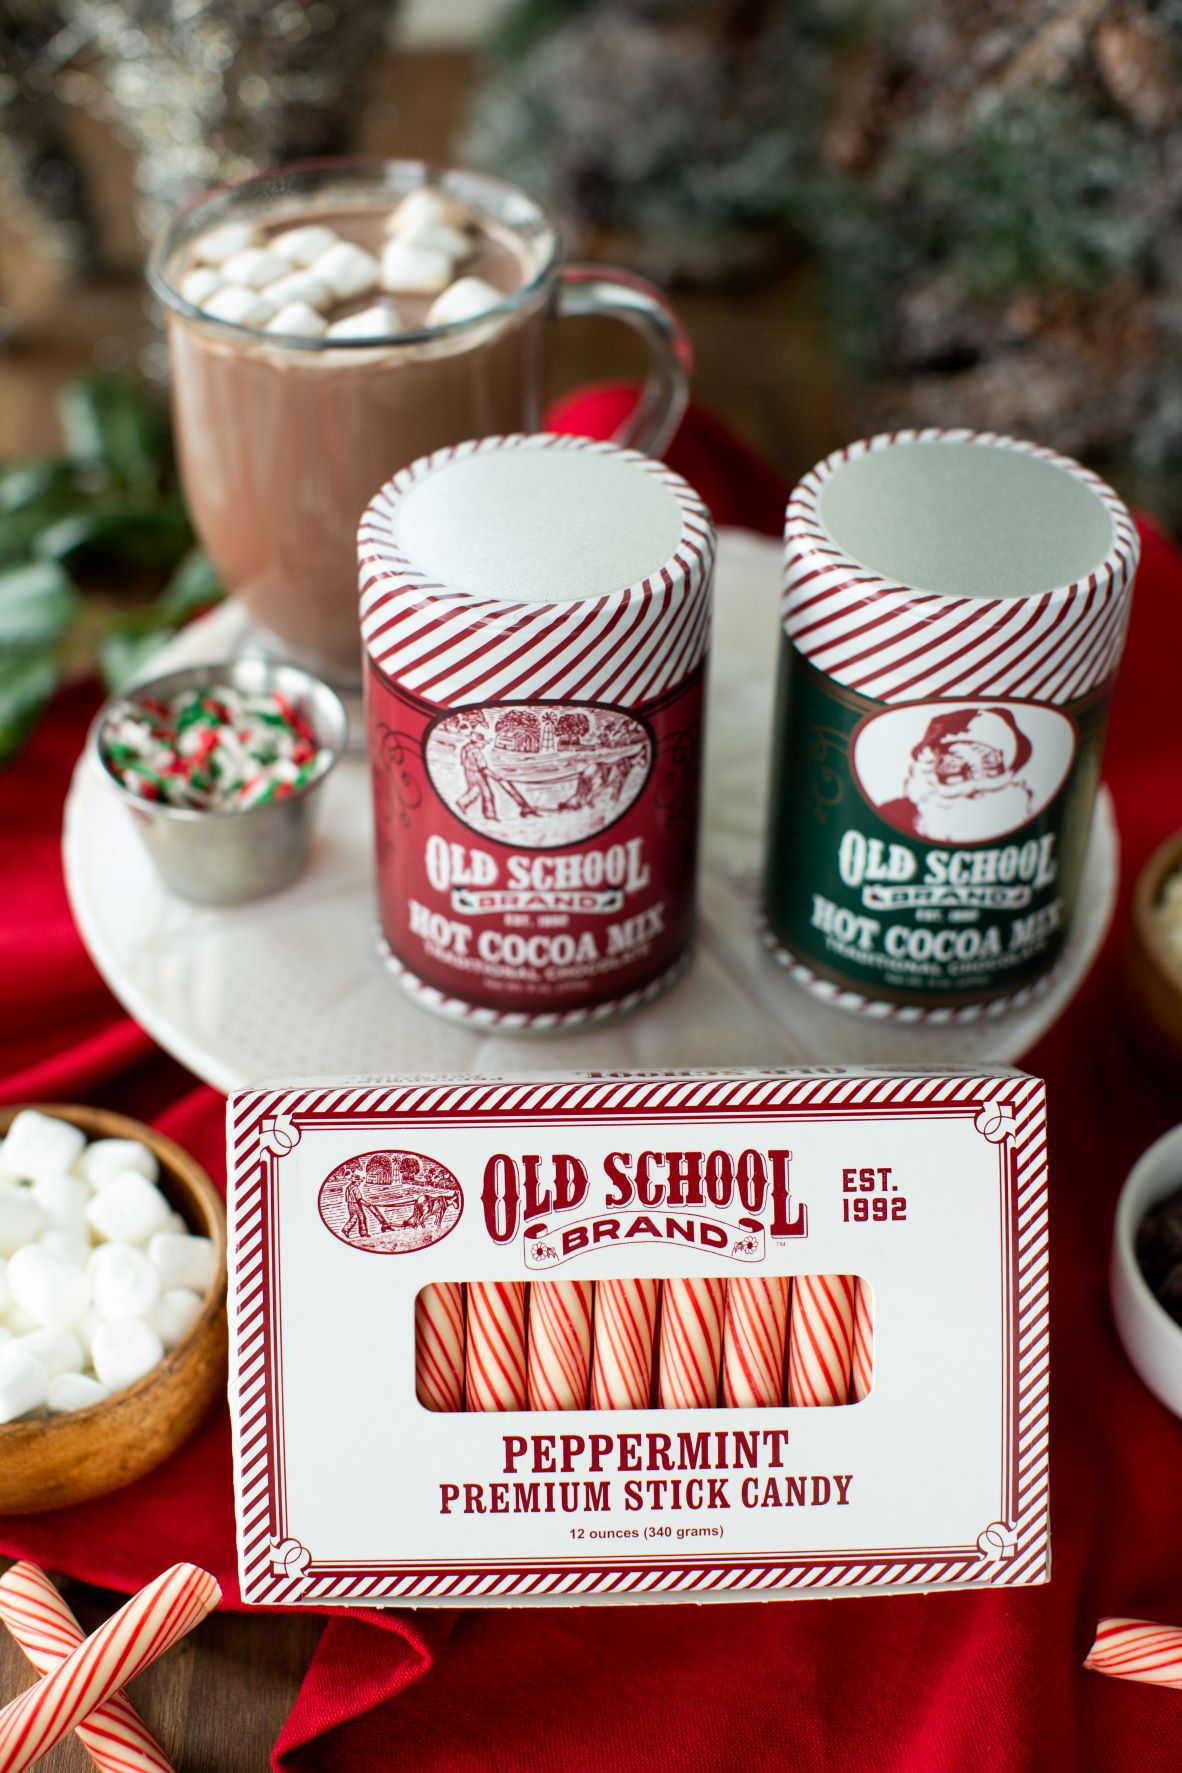 Old School Mill, Inc. – Crafter Of Authentic Foods